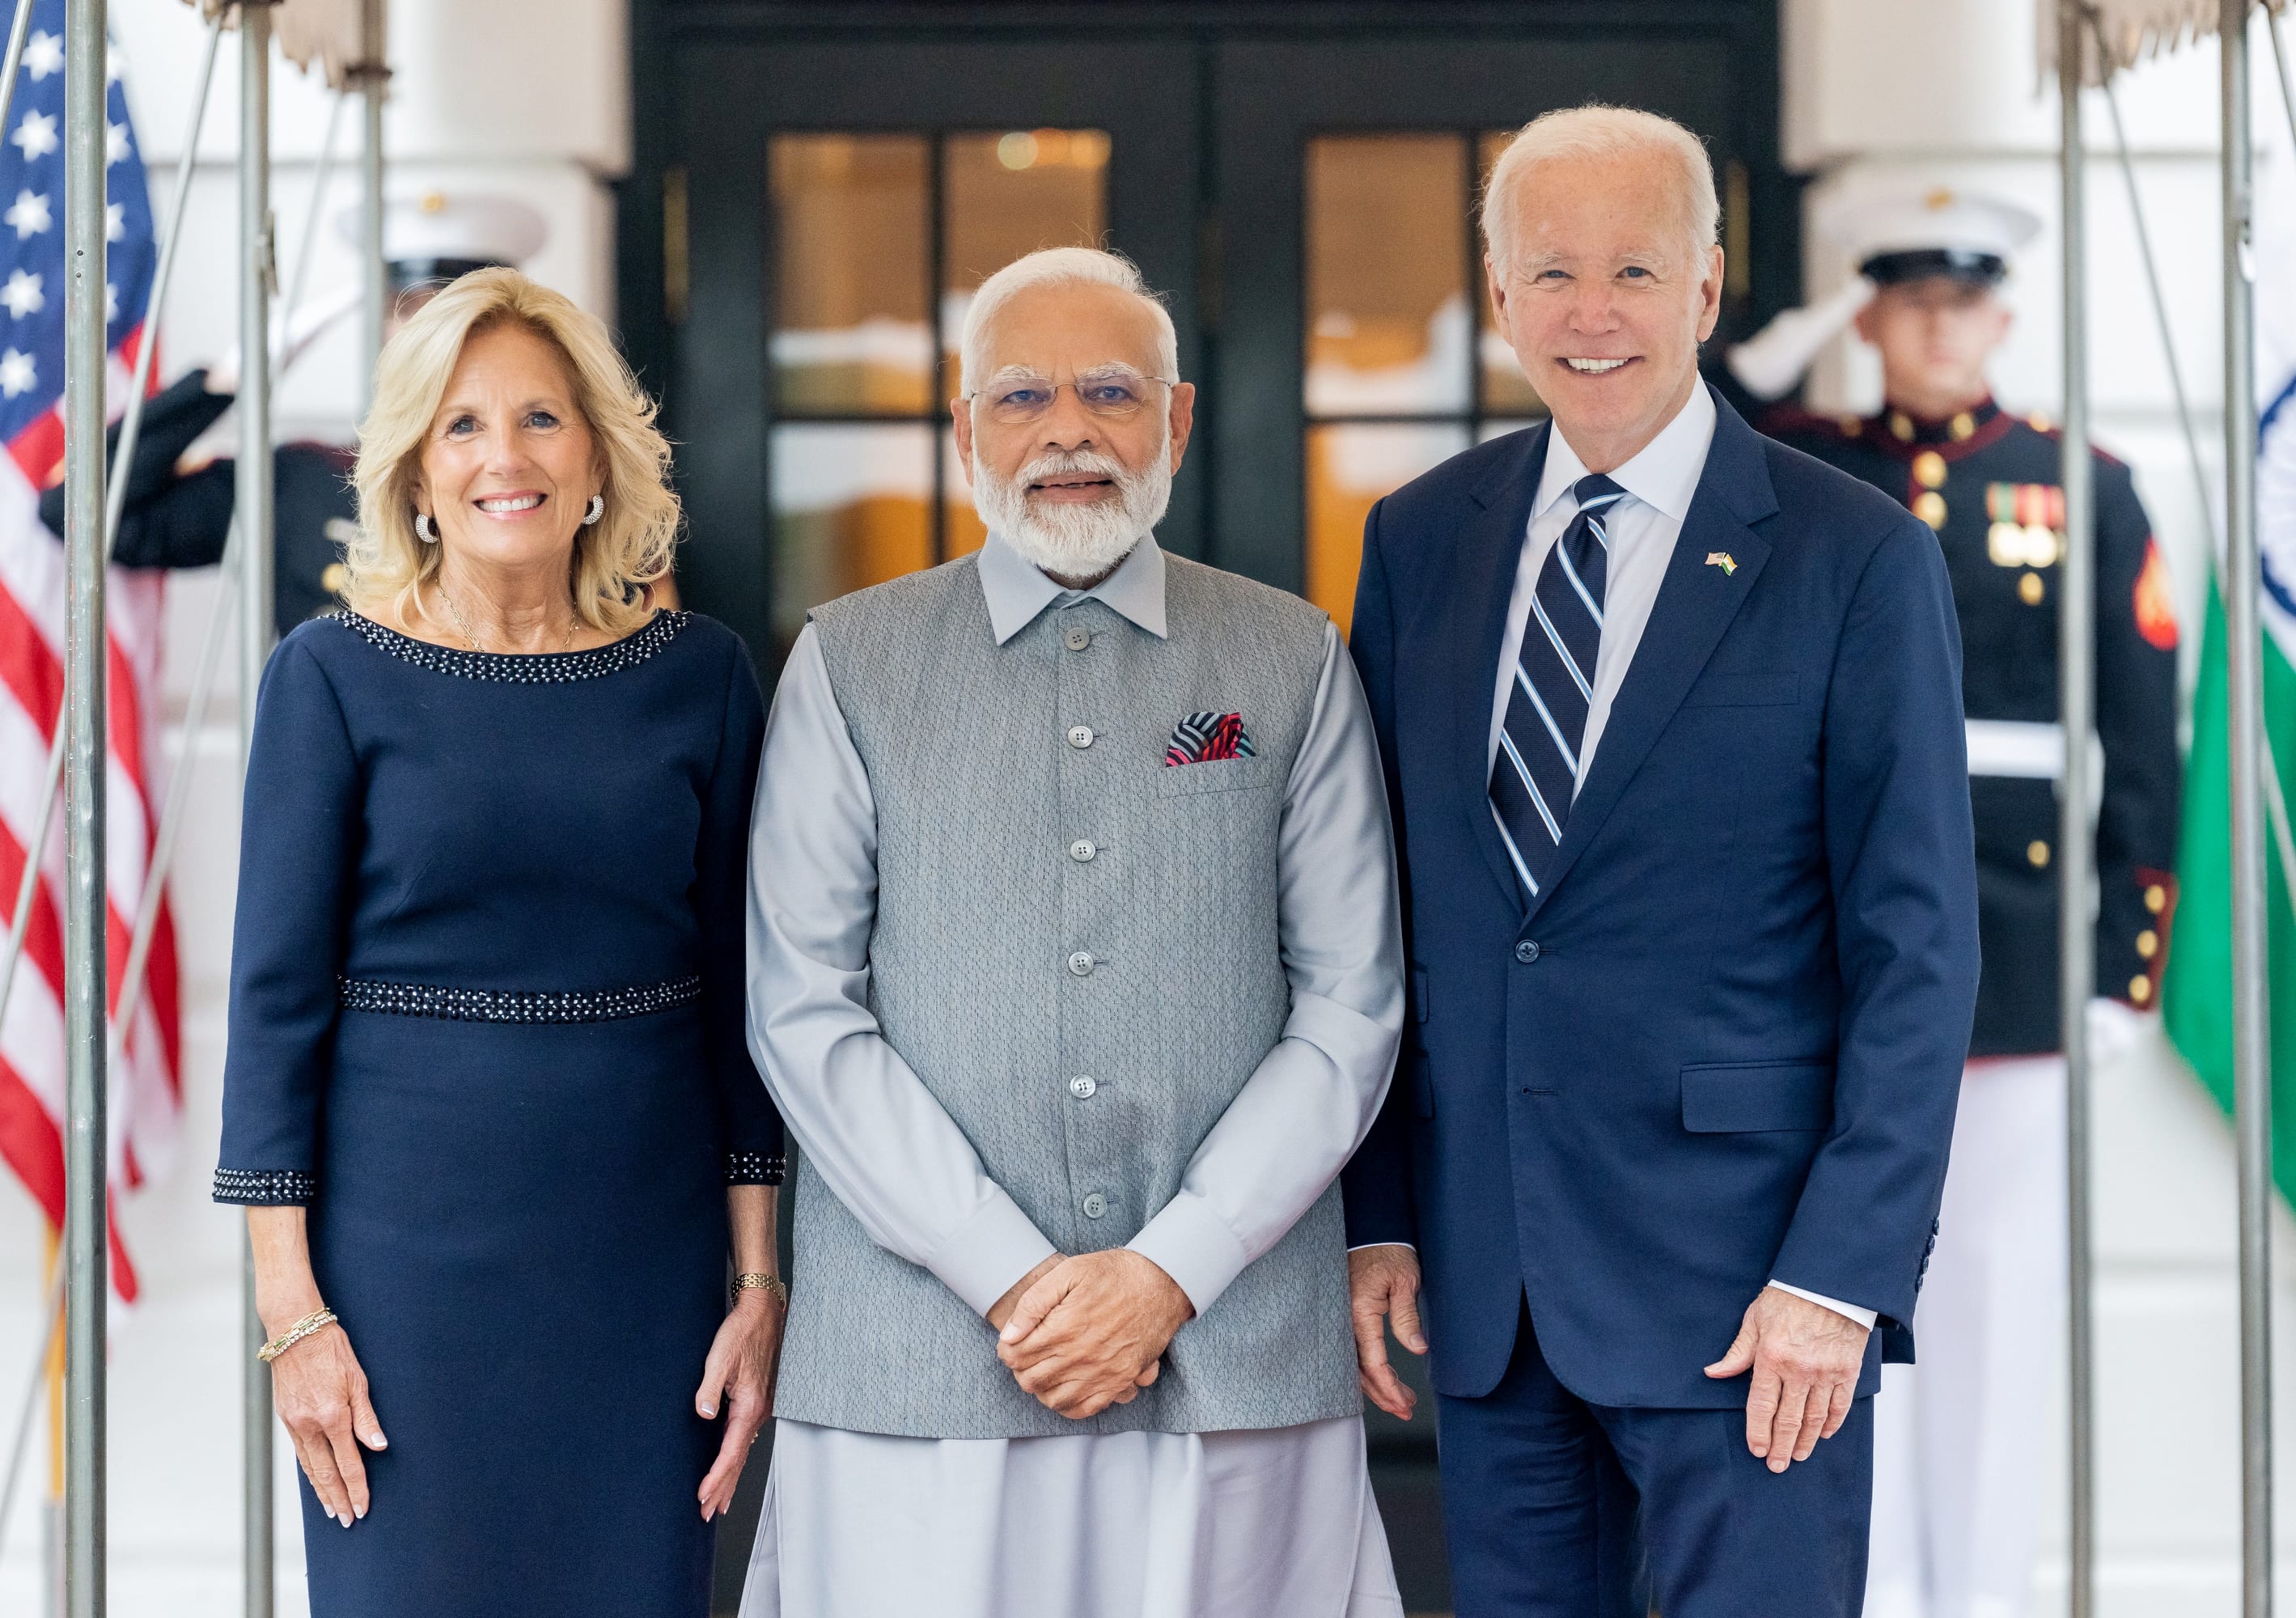 PM Modi in US Highlights "India and US are committed to working